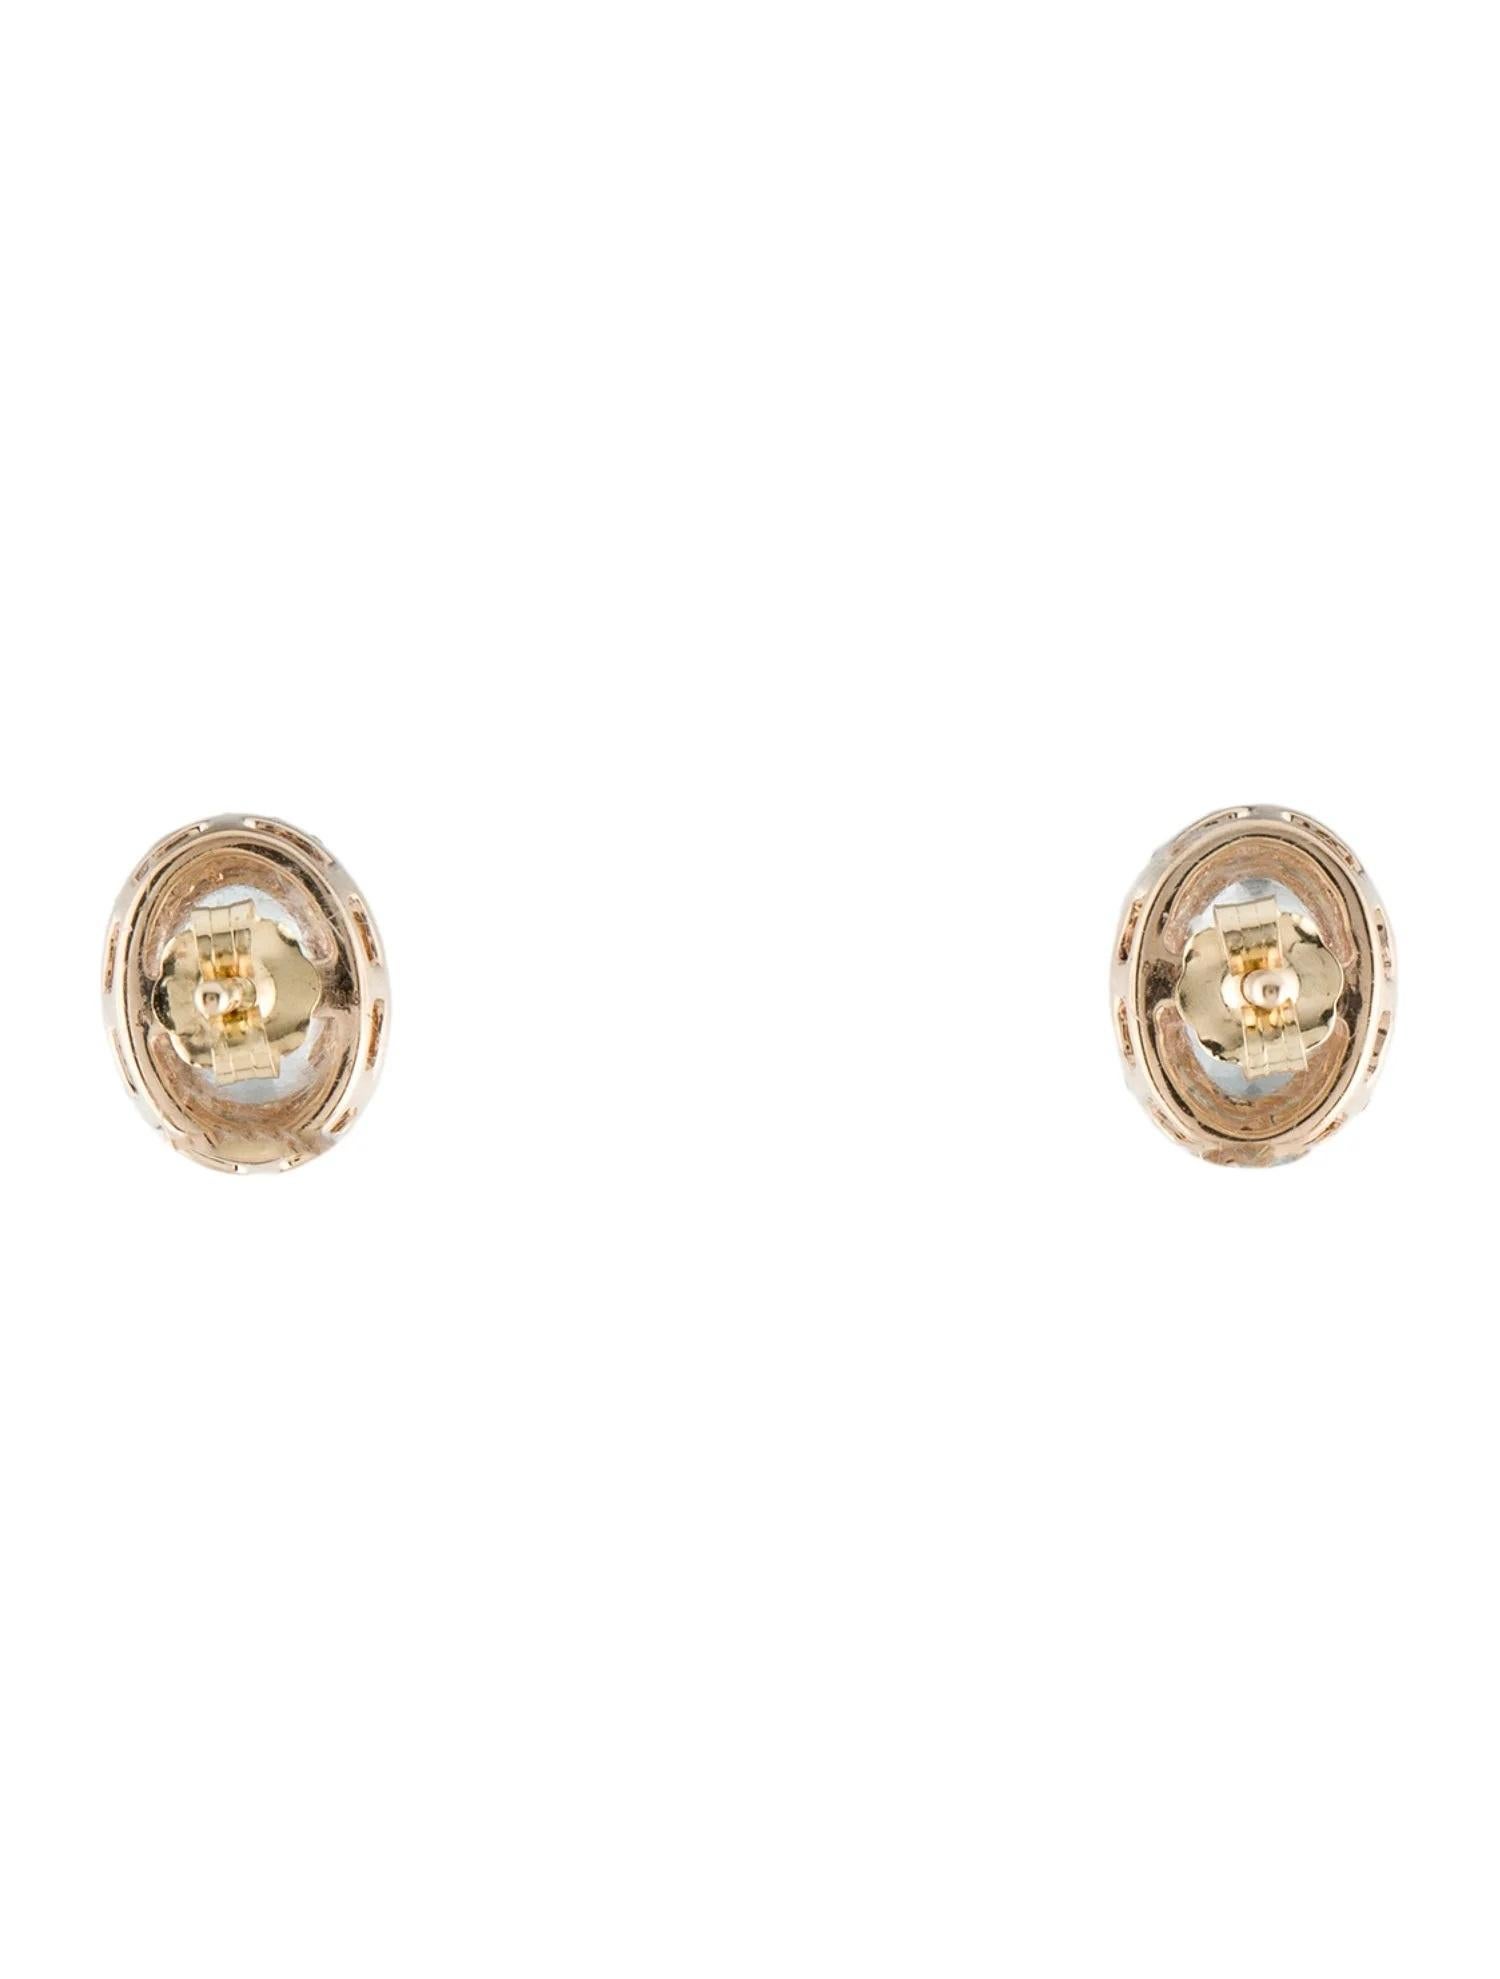 Enhance your jewelry collection with these stunning designer stud earrings crafted in 14K yellow gold, featuring beautiful oval aquamarines and sparkling diamonds.

Specifications:

* SKU: BHER-150AQD
* Stock ID: EARRI276452
* Material: 14K Yellow